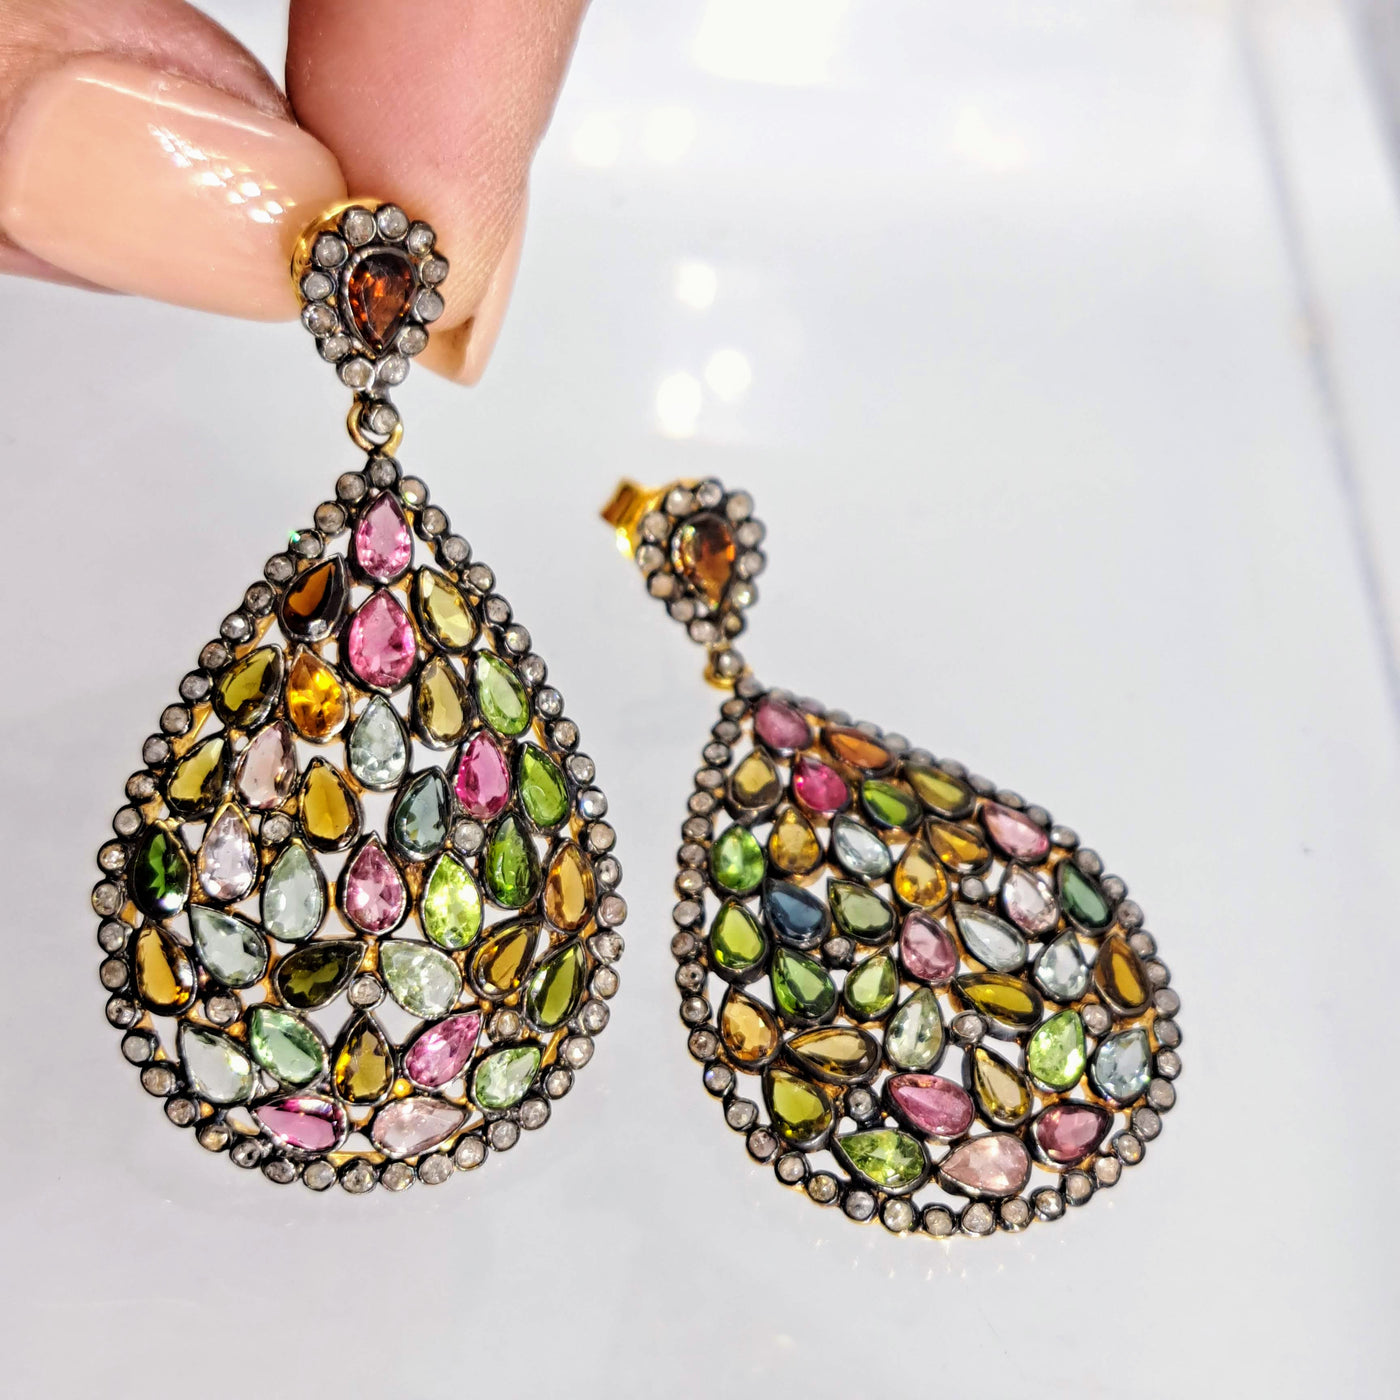 "Tapestry" 2.25" Earrings - Multicolored Tourmaline, Diamonds, Gold Sterling